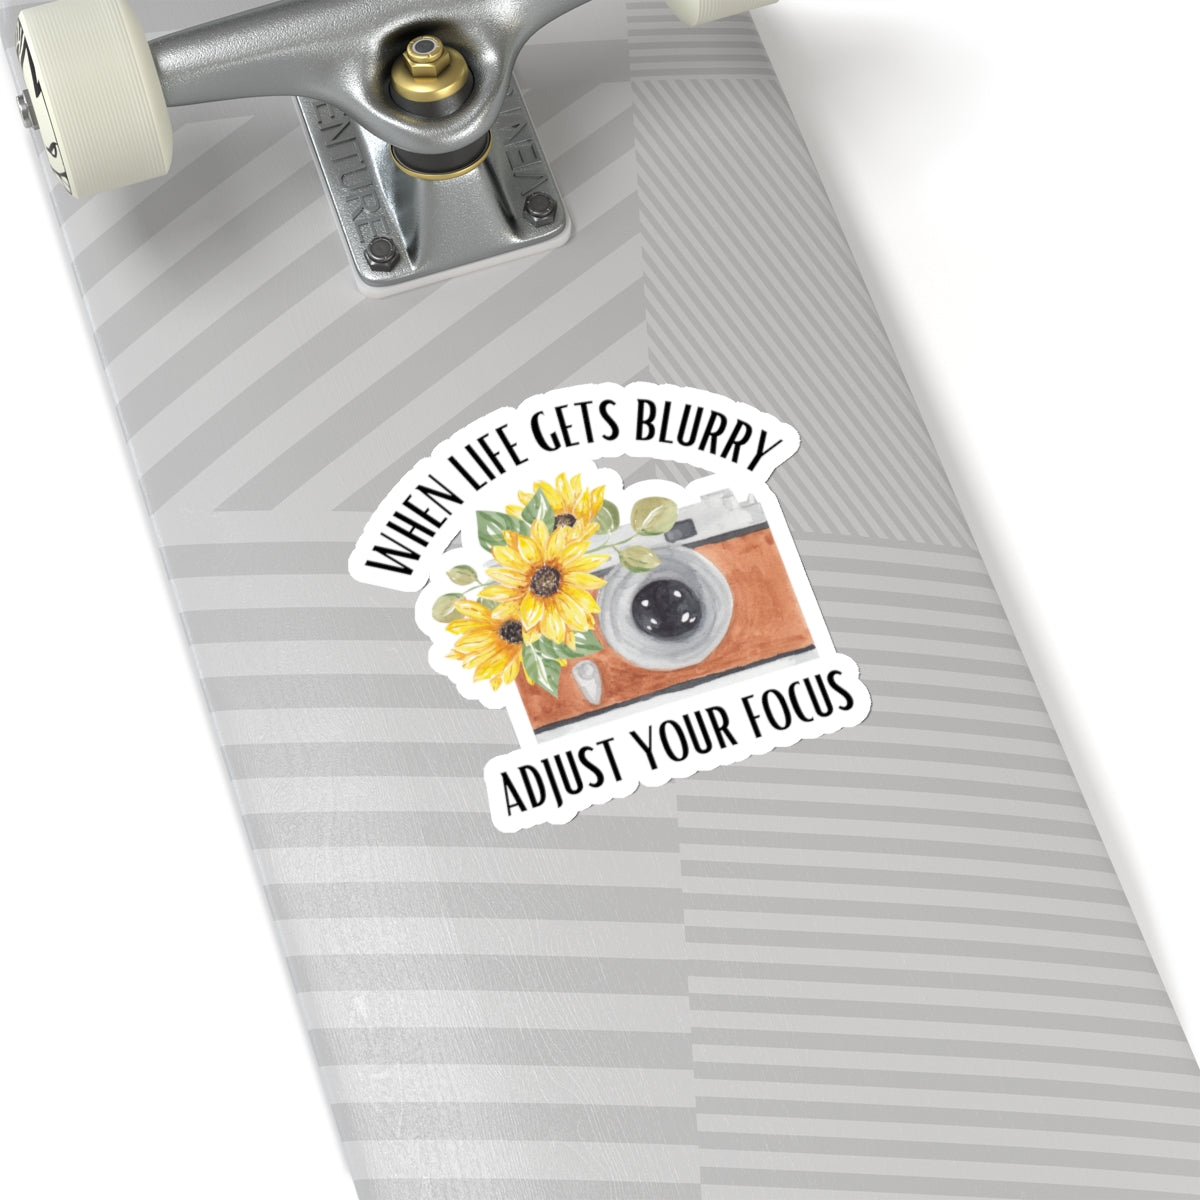 When Life Gets Blurry Adjust Your Focus Camera Sticker Kiss-Cut Stickers